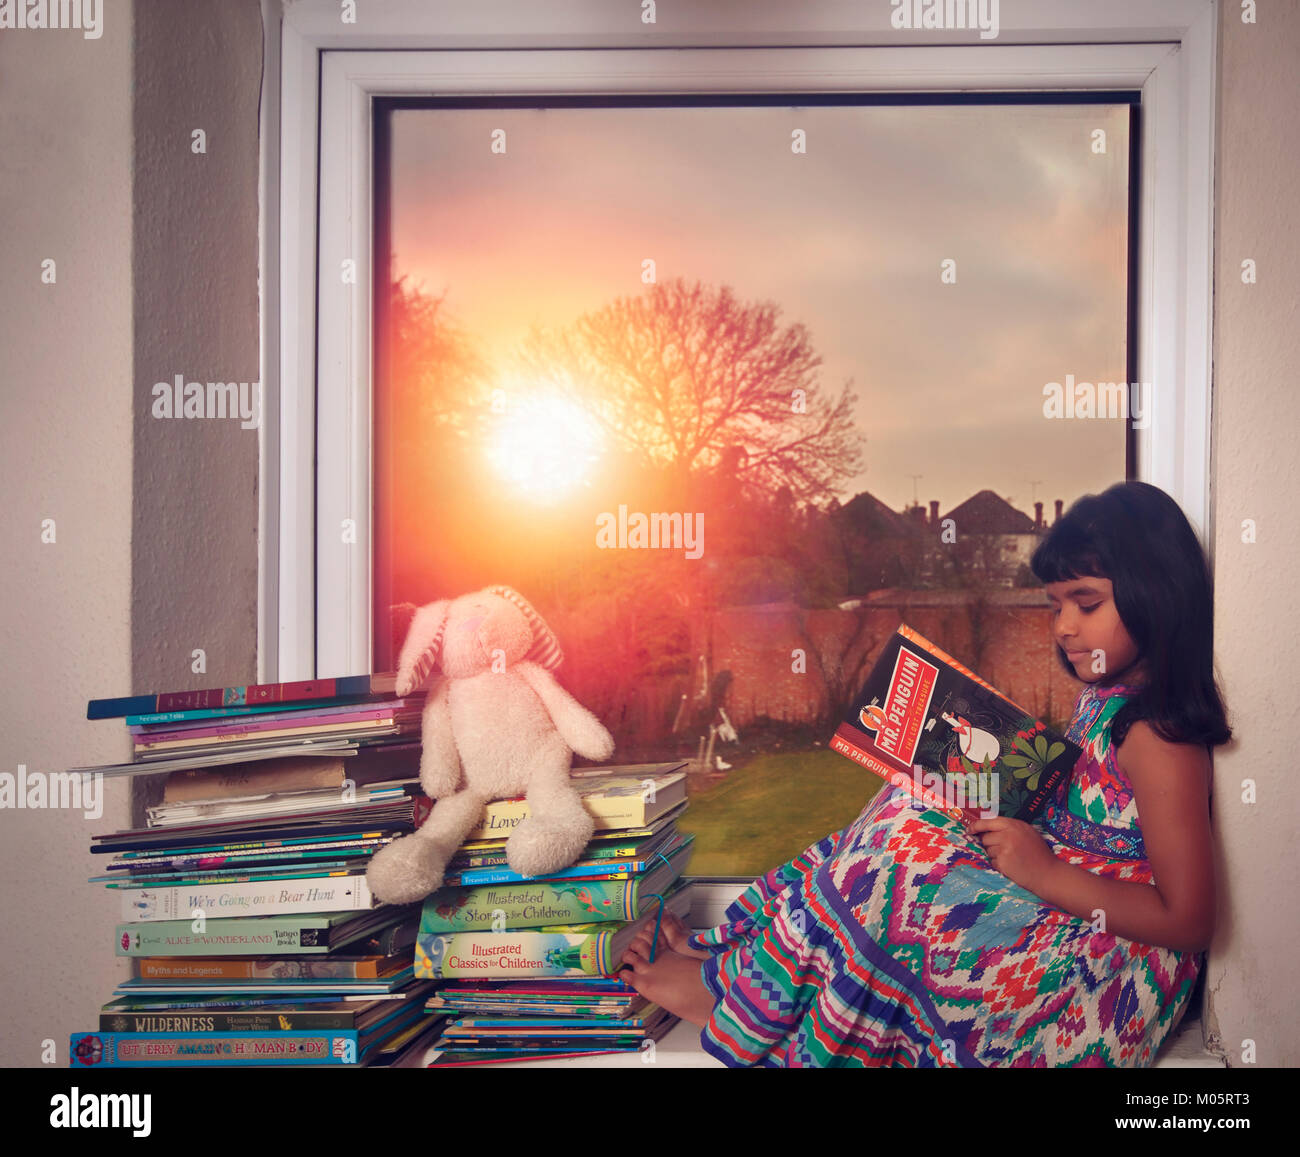 Little girl in colourful dress reading a book by the window against a sunset in the background Stock Photo